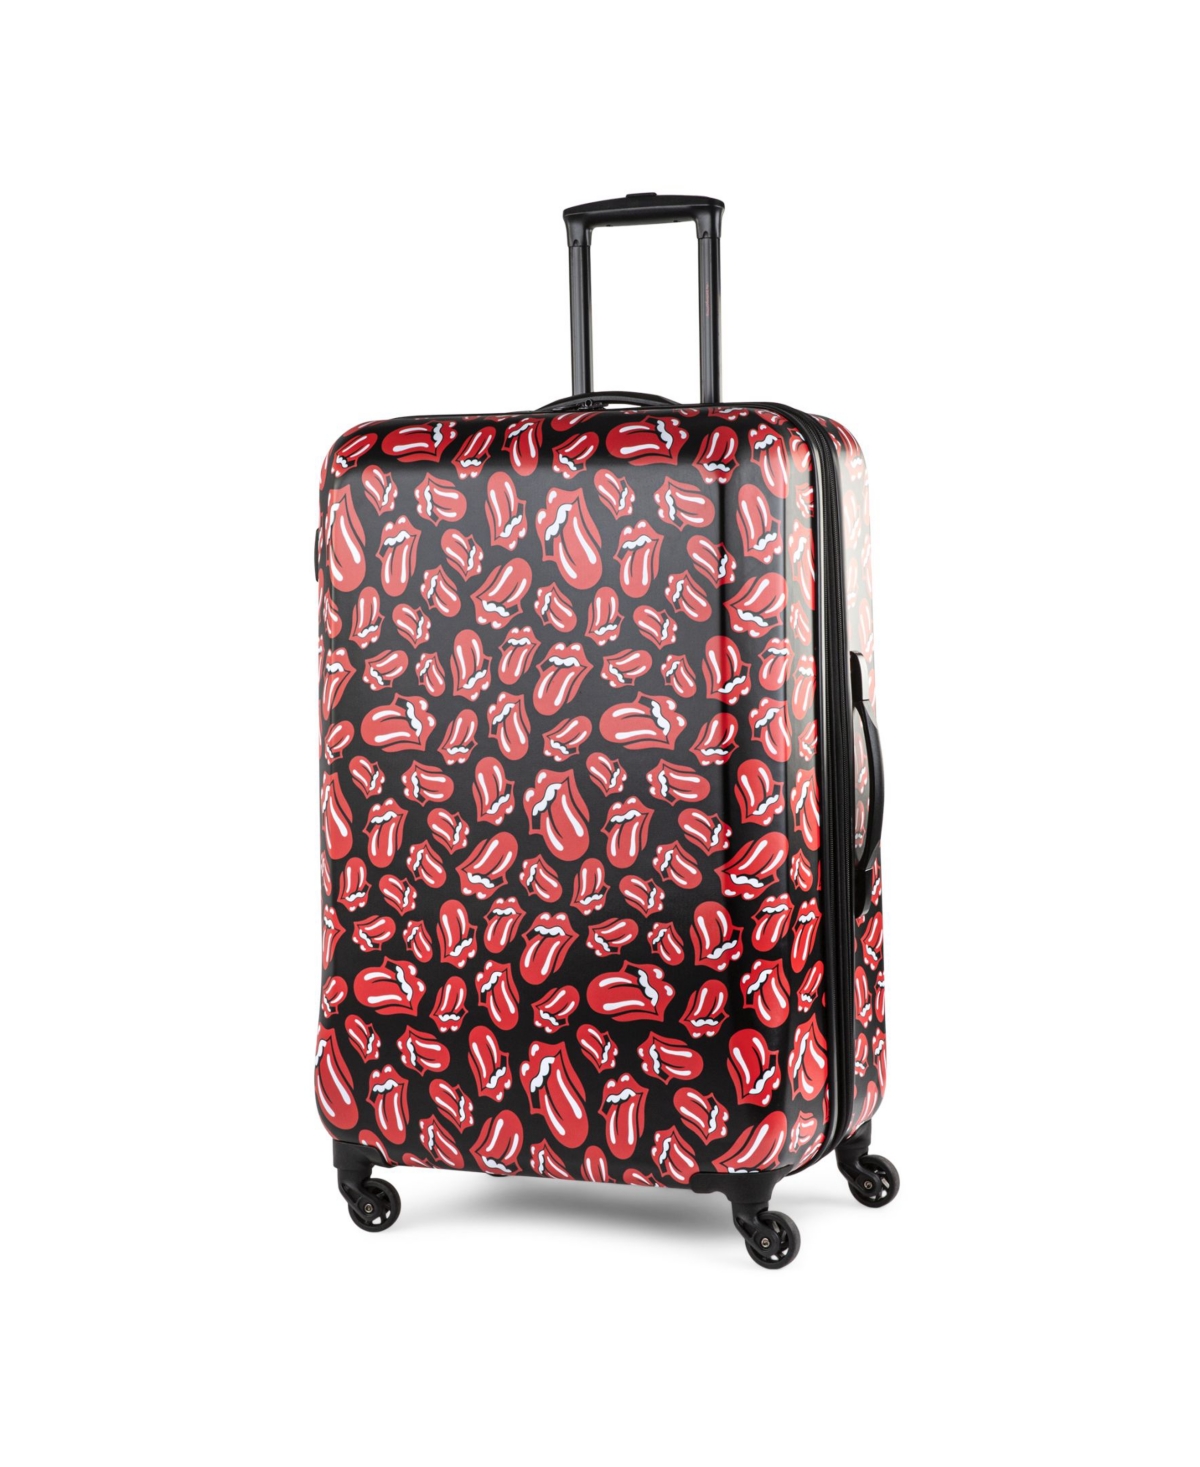 Ruby Tuesday 28" Spinner Luggage - Black and Red